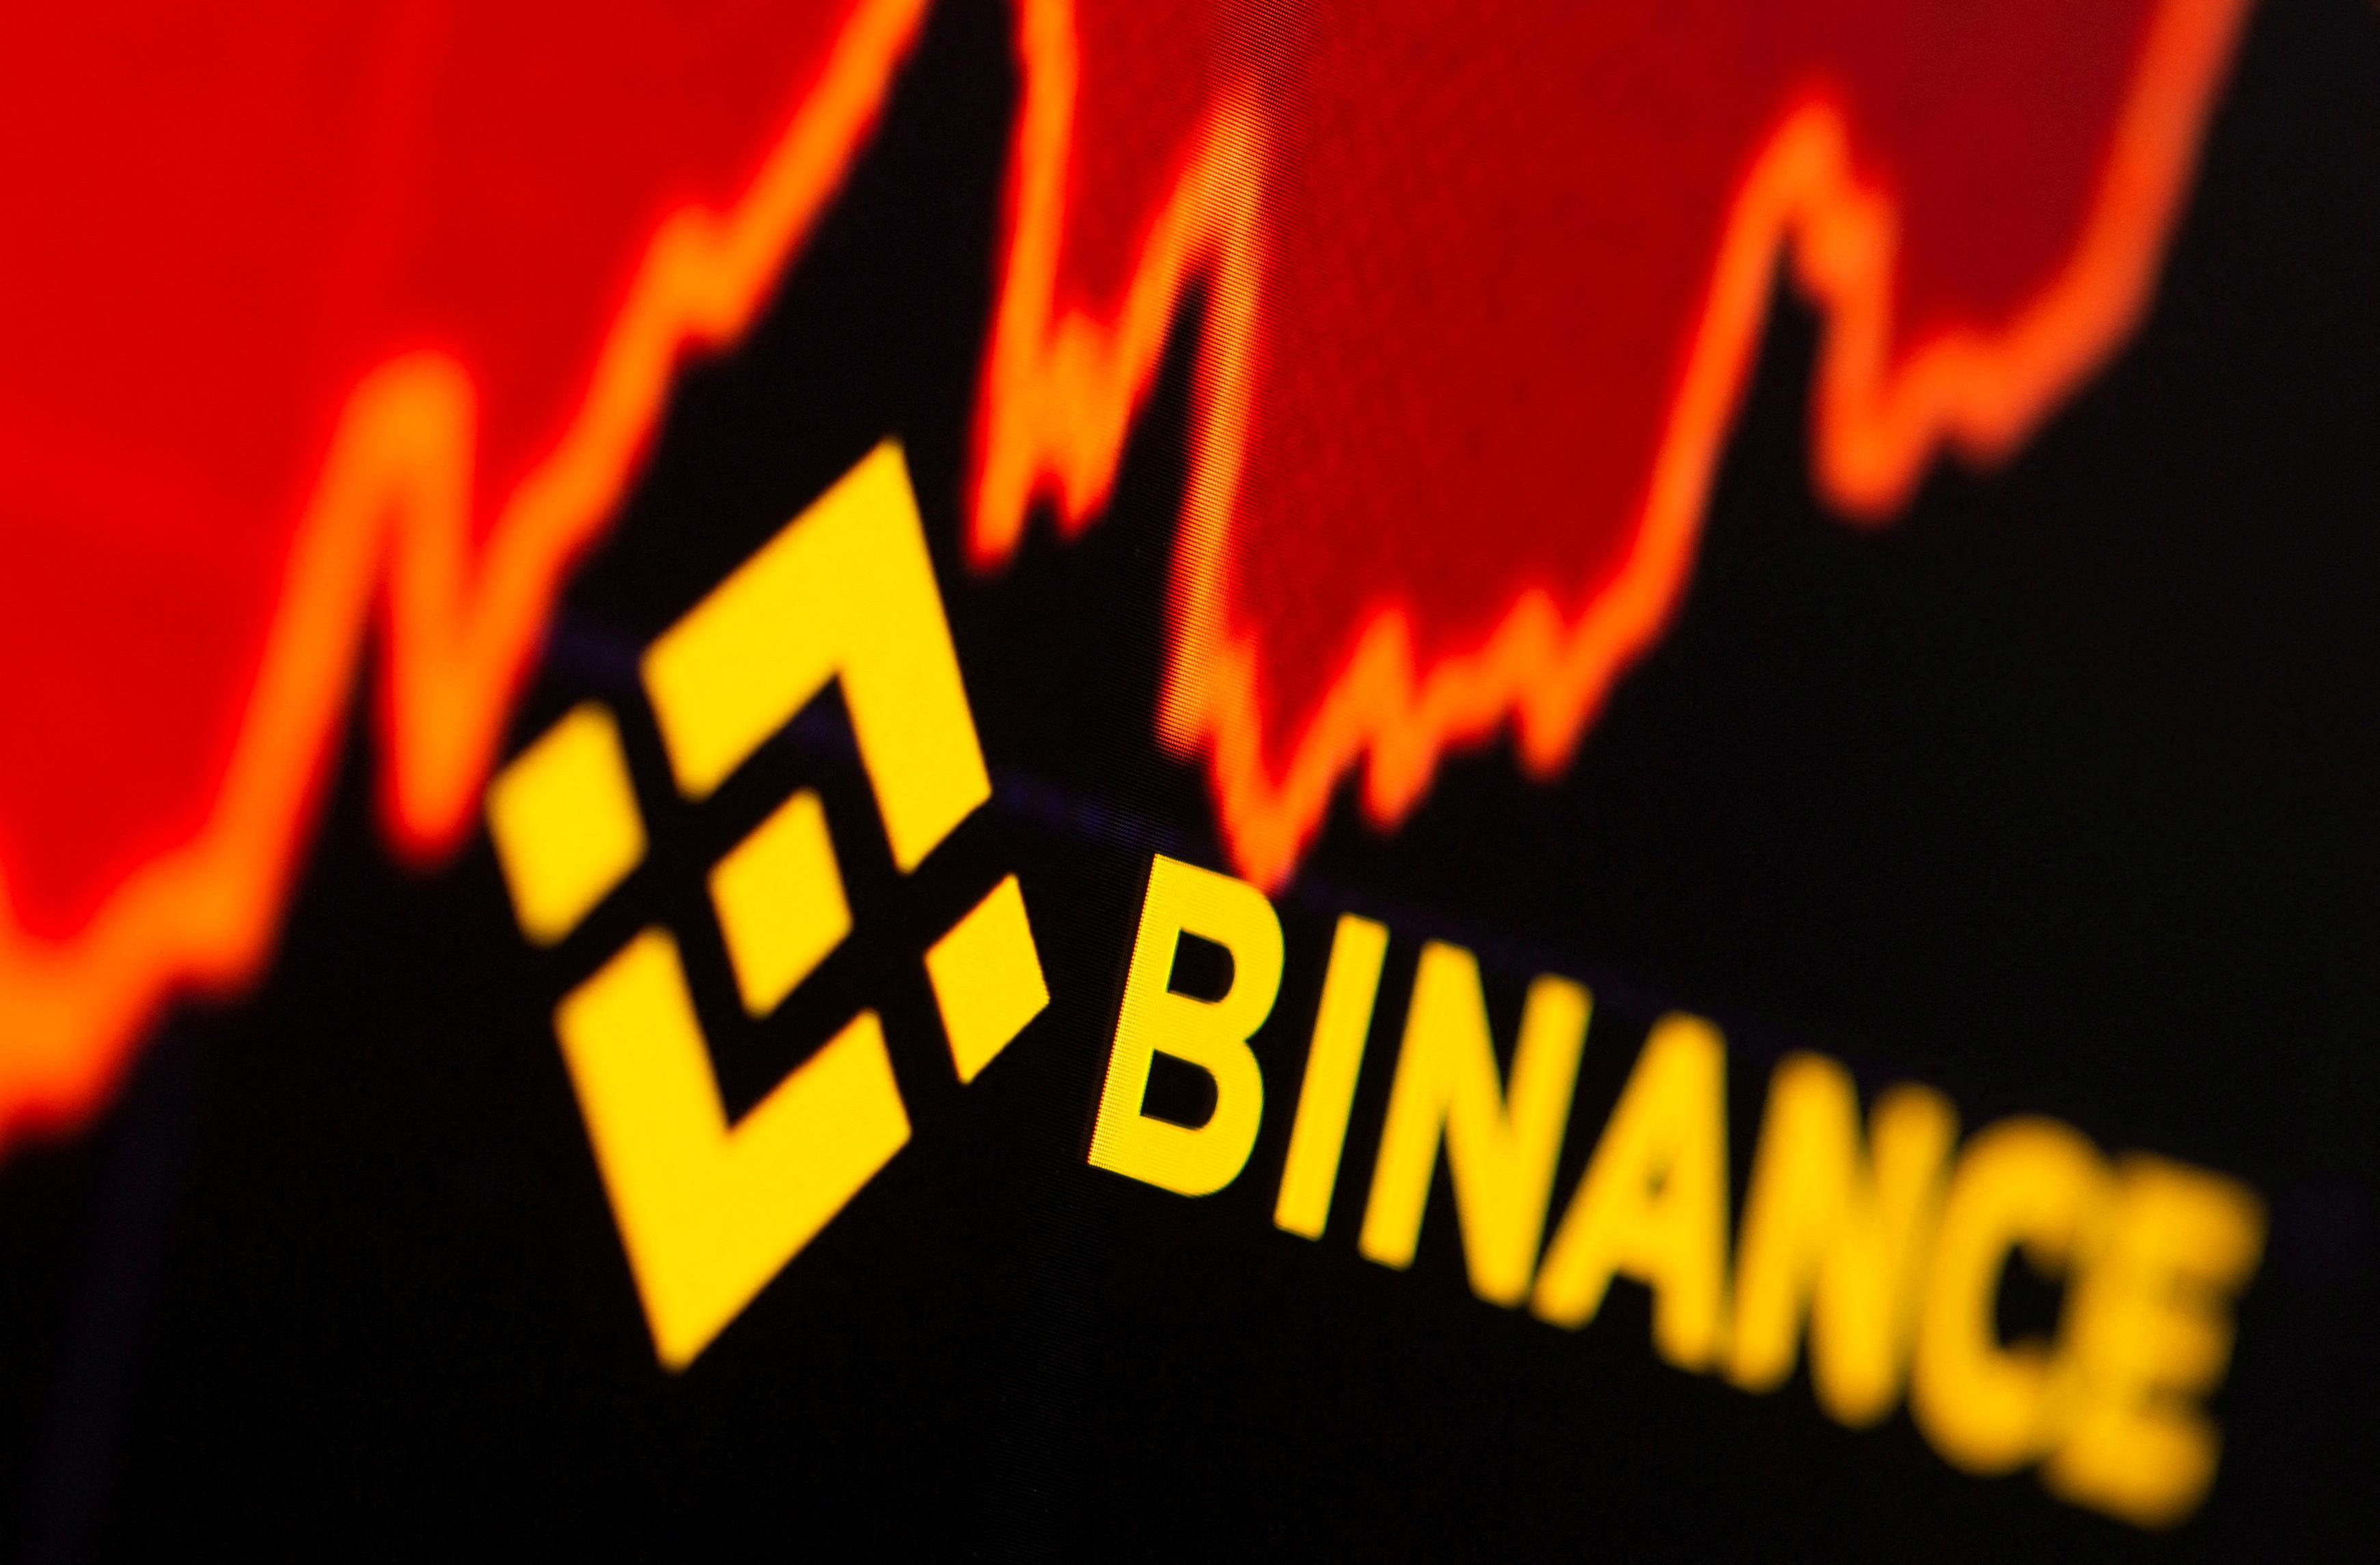 Binance Announces B2B Solution to Integrate Buy Crypto Function